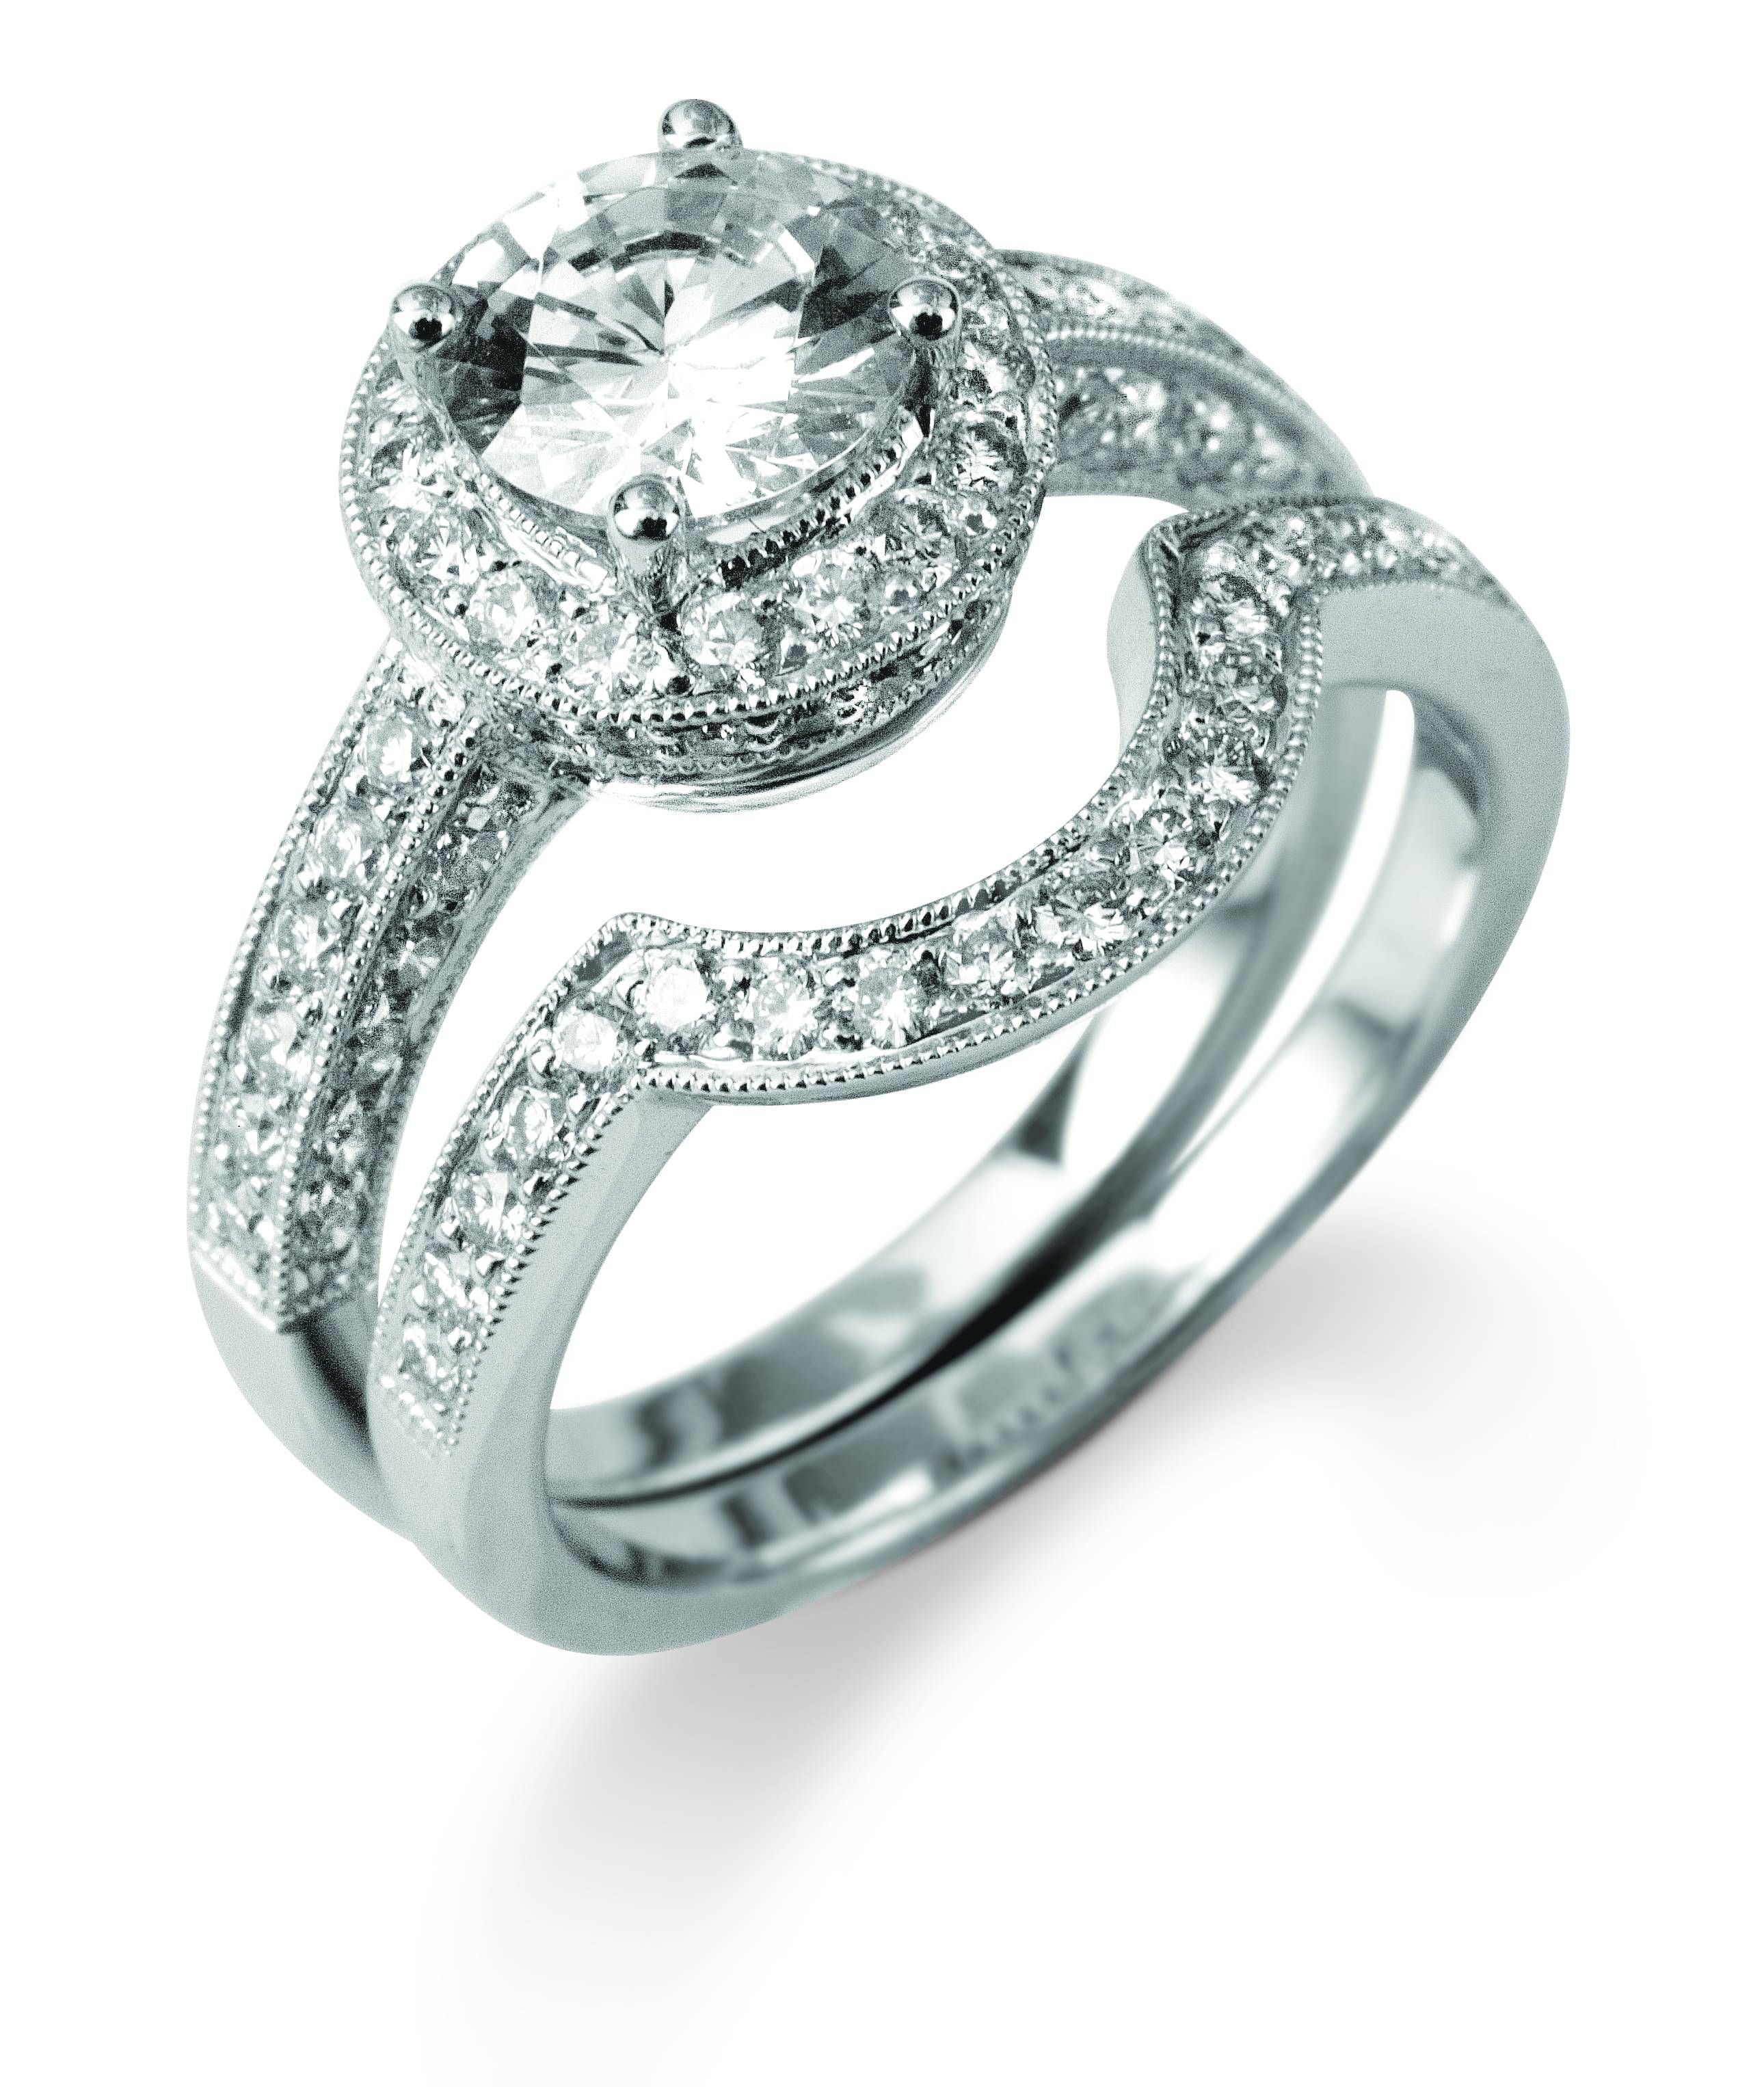 Wedding Rings : Wedding Bands For Solitaire Wedding Bands For A For Matching Engagement And Wedding Bands (View 9 of 15)